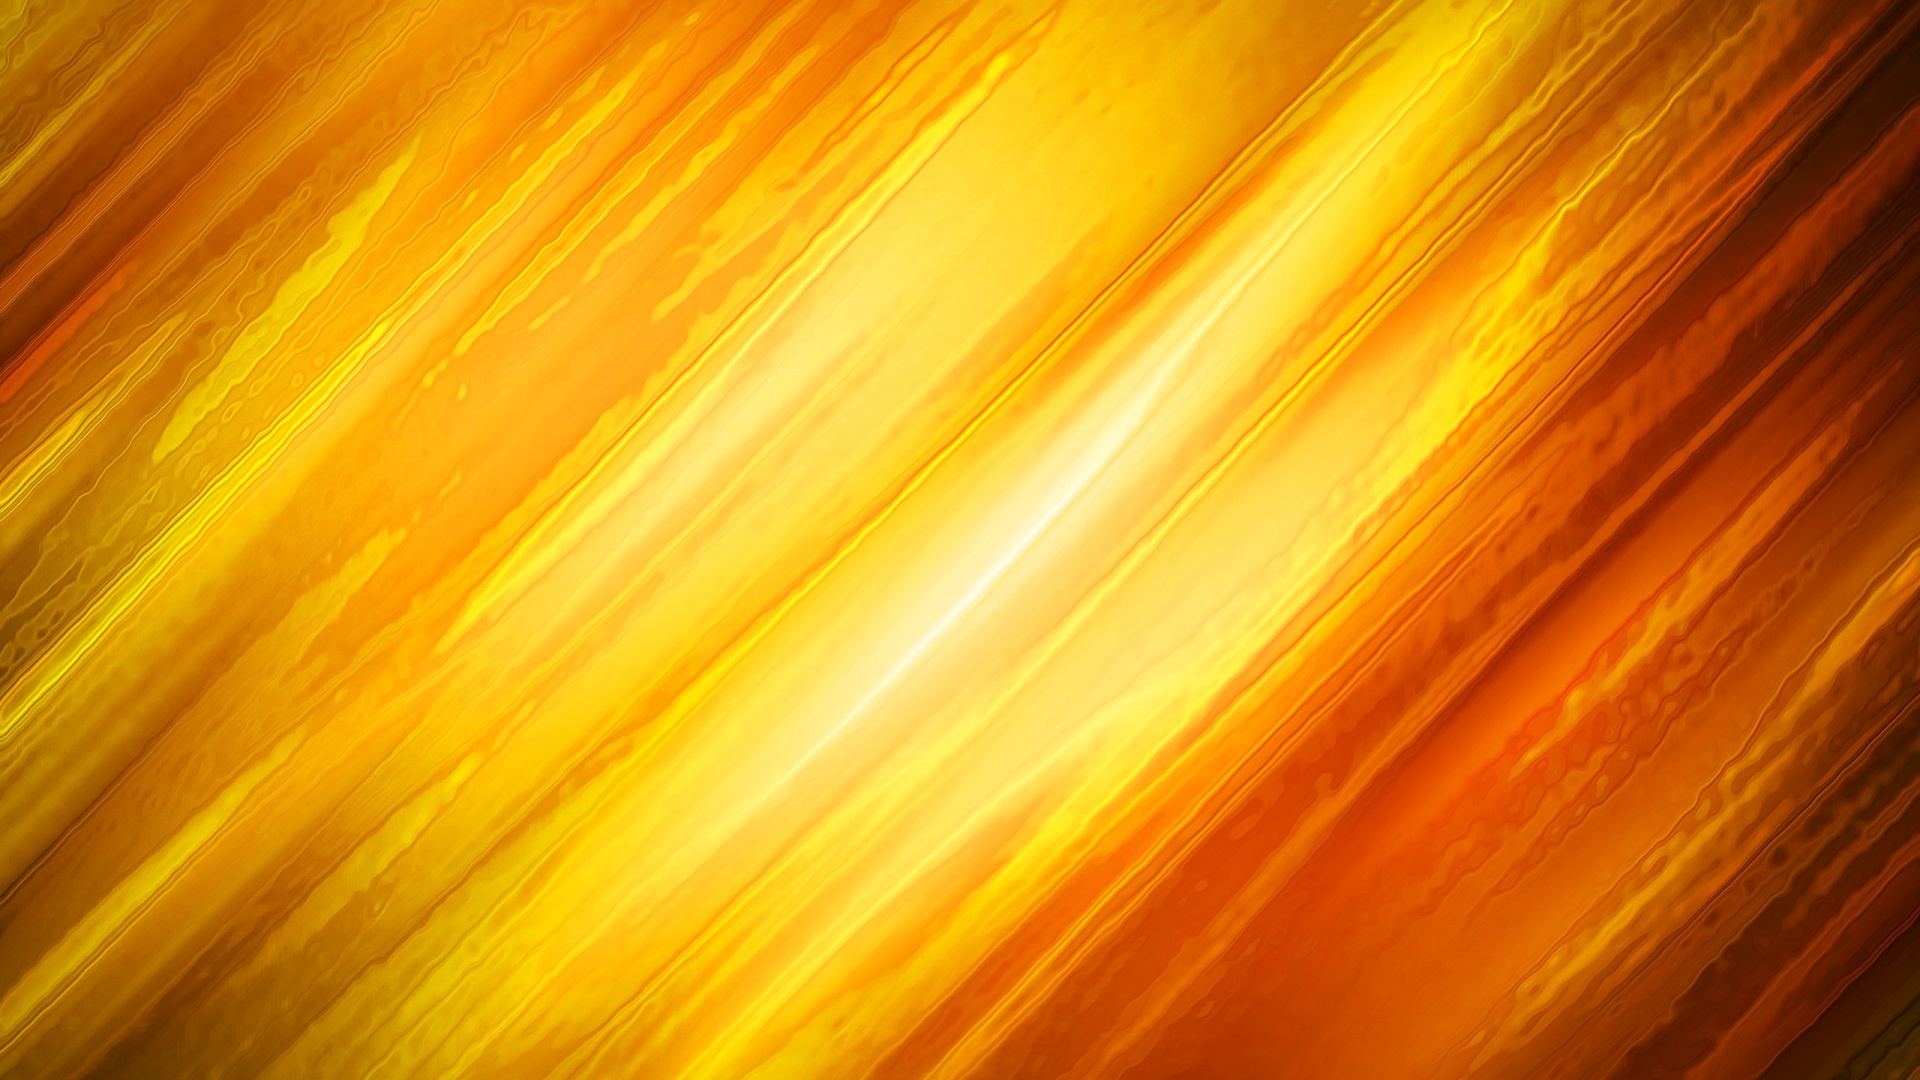 Abstract Yellow And Orange Background Desktop Pc Mac